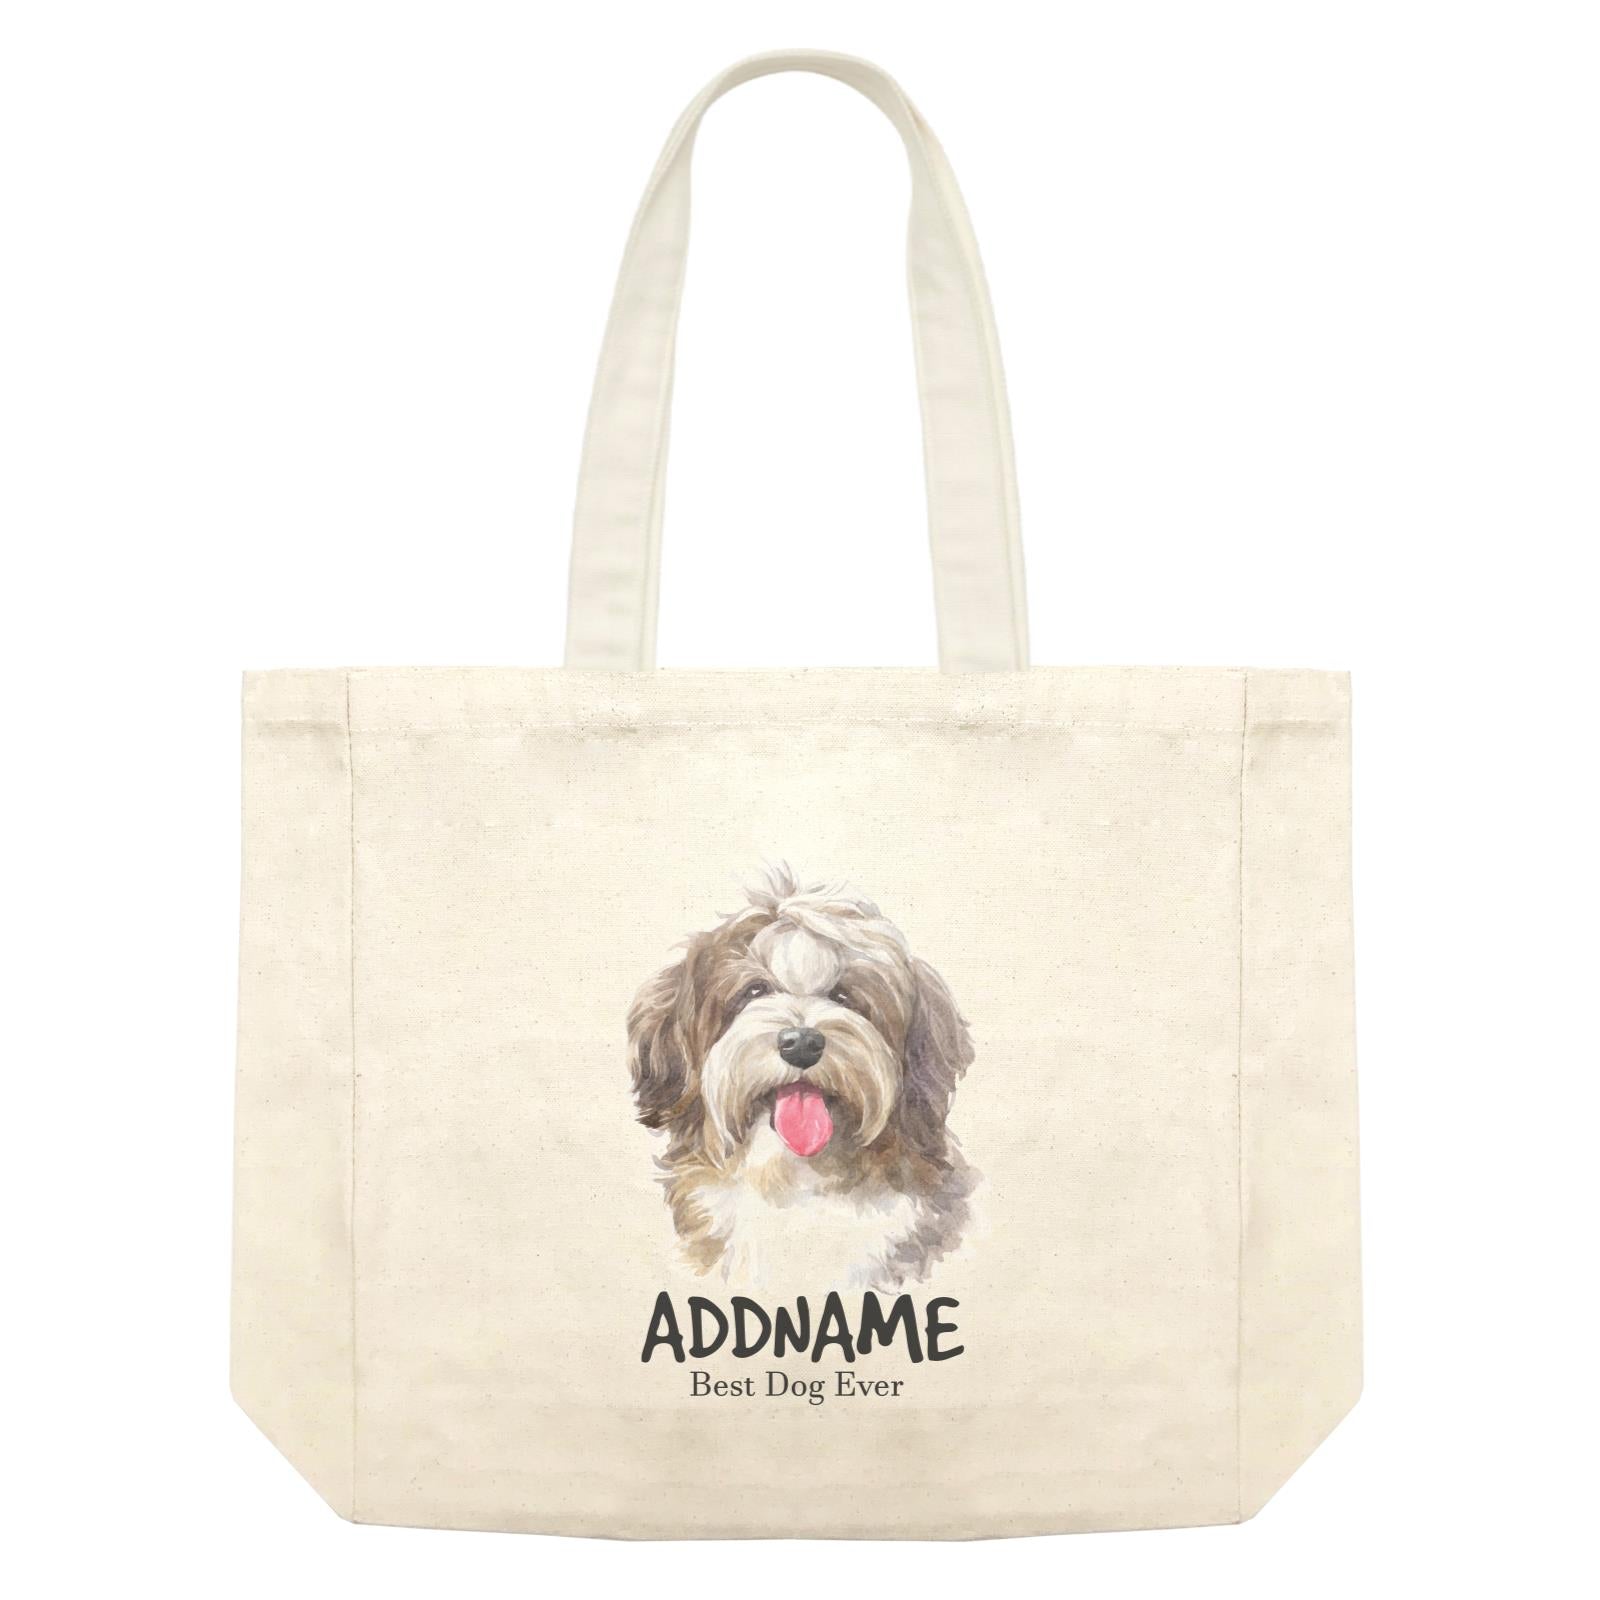 Watercolor Dog Shaggy Havanese Best Dog Ever Addname Shopping Bag